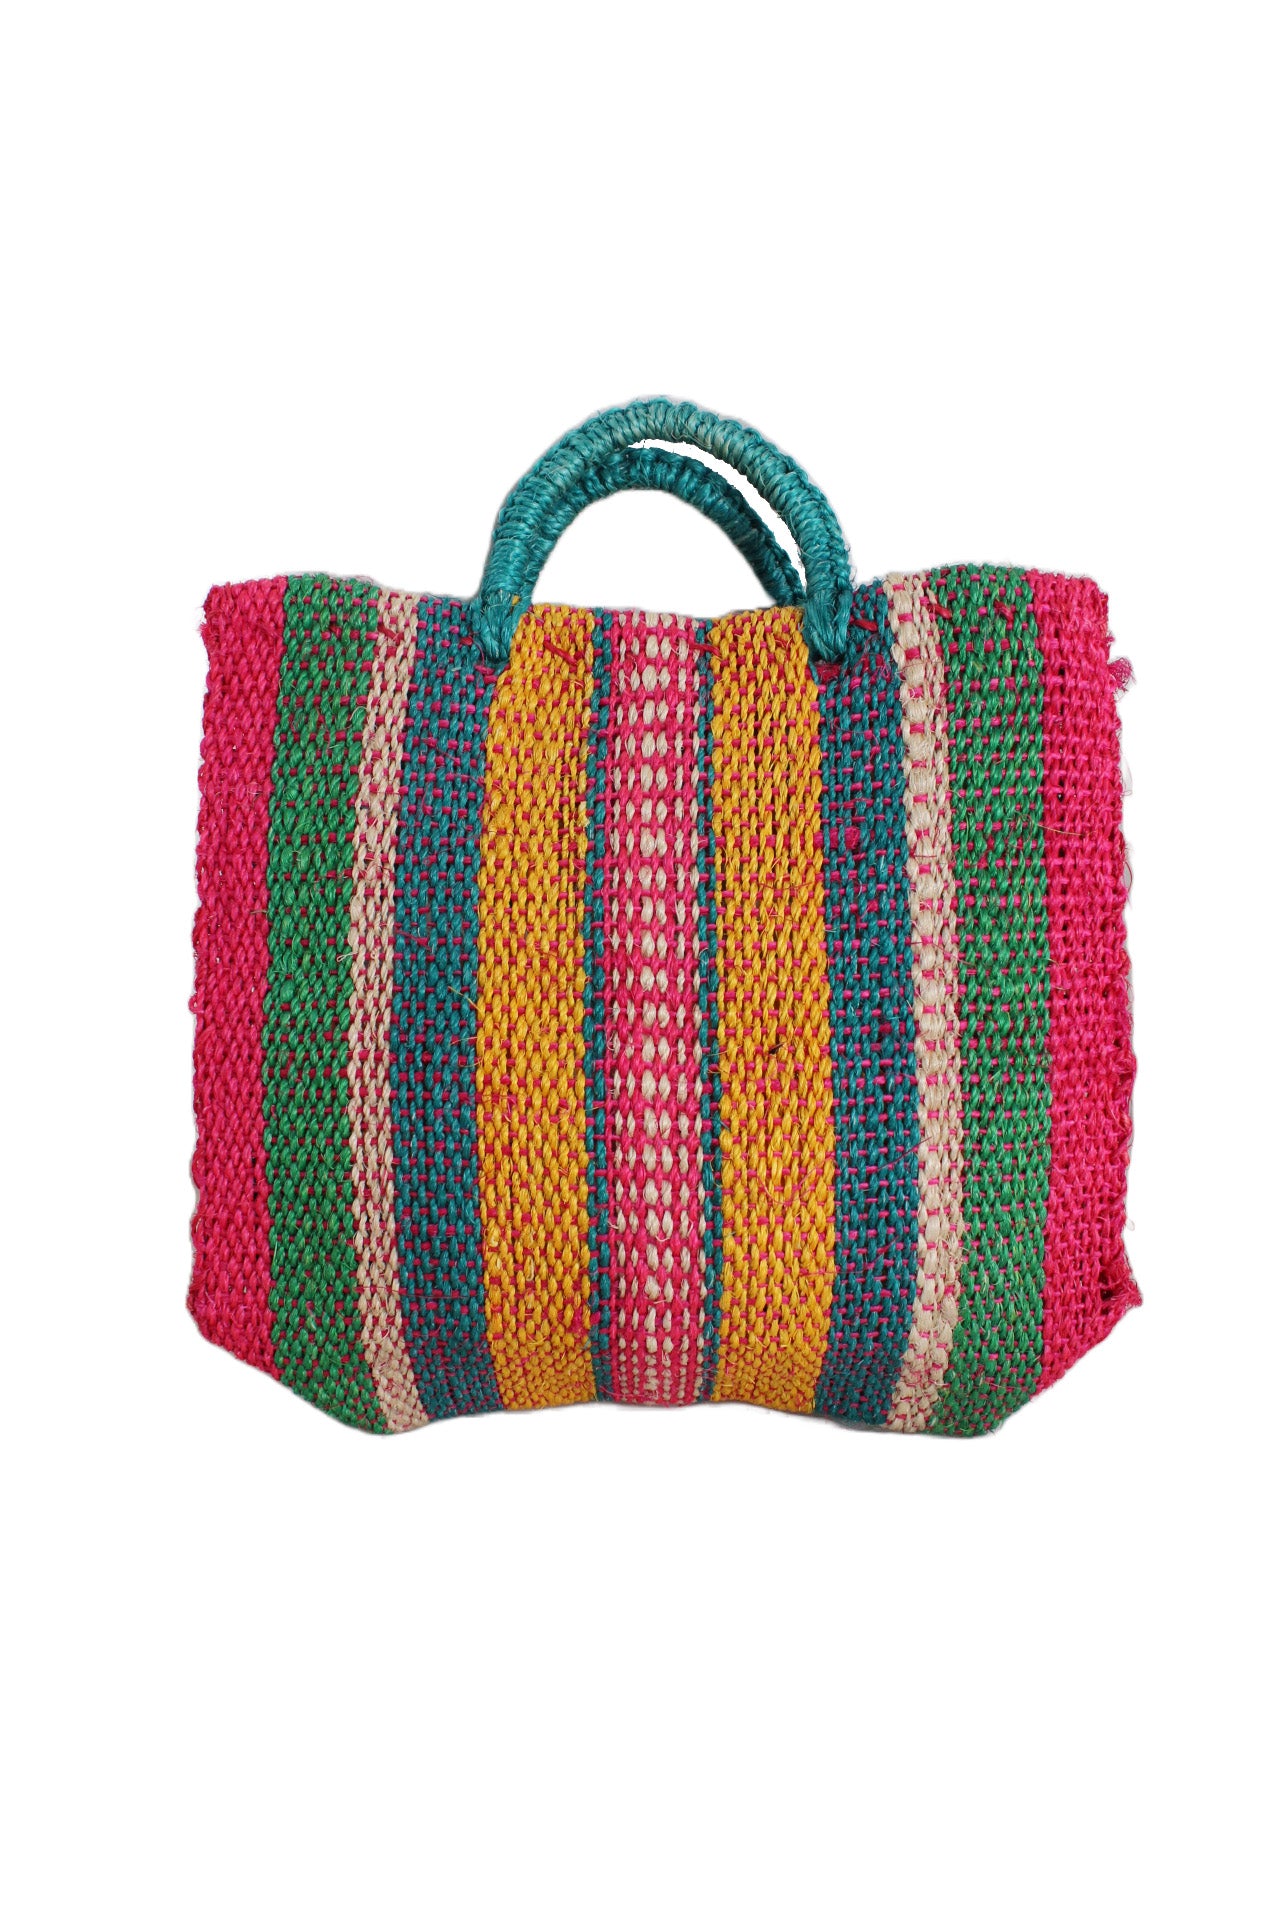 front of unlabeled multicolor woven handbag. features top handle, stripes pattern throughout, and open top. 